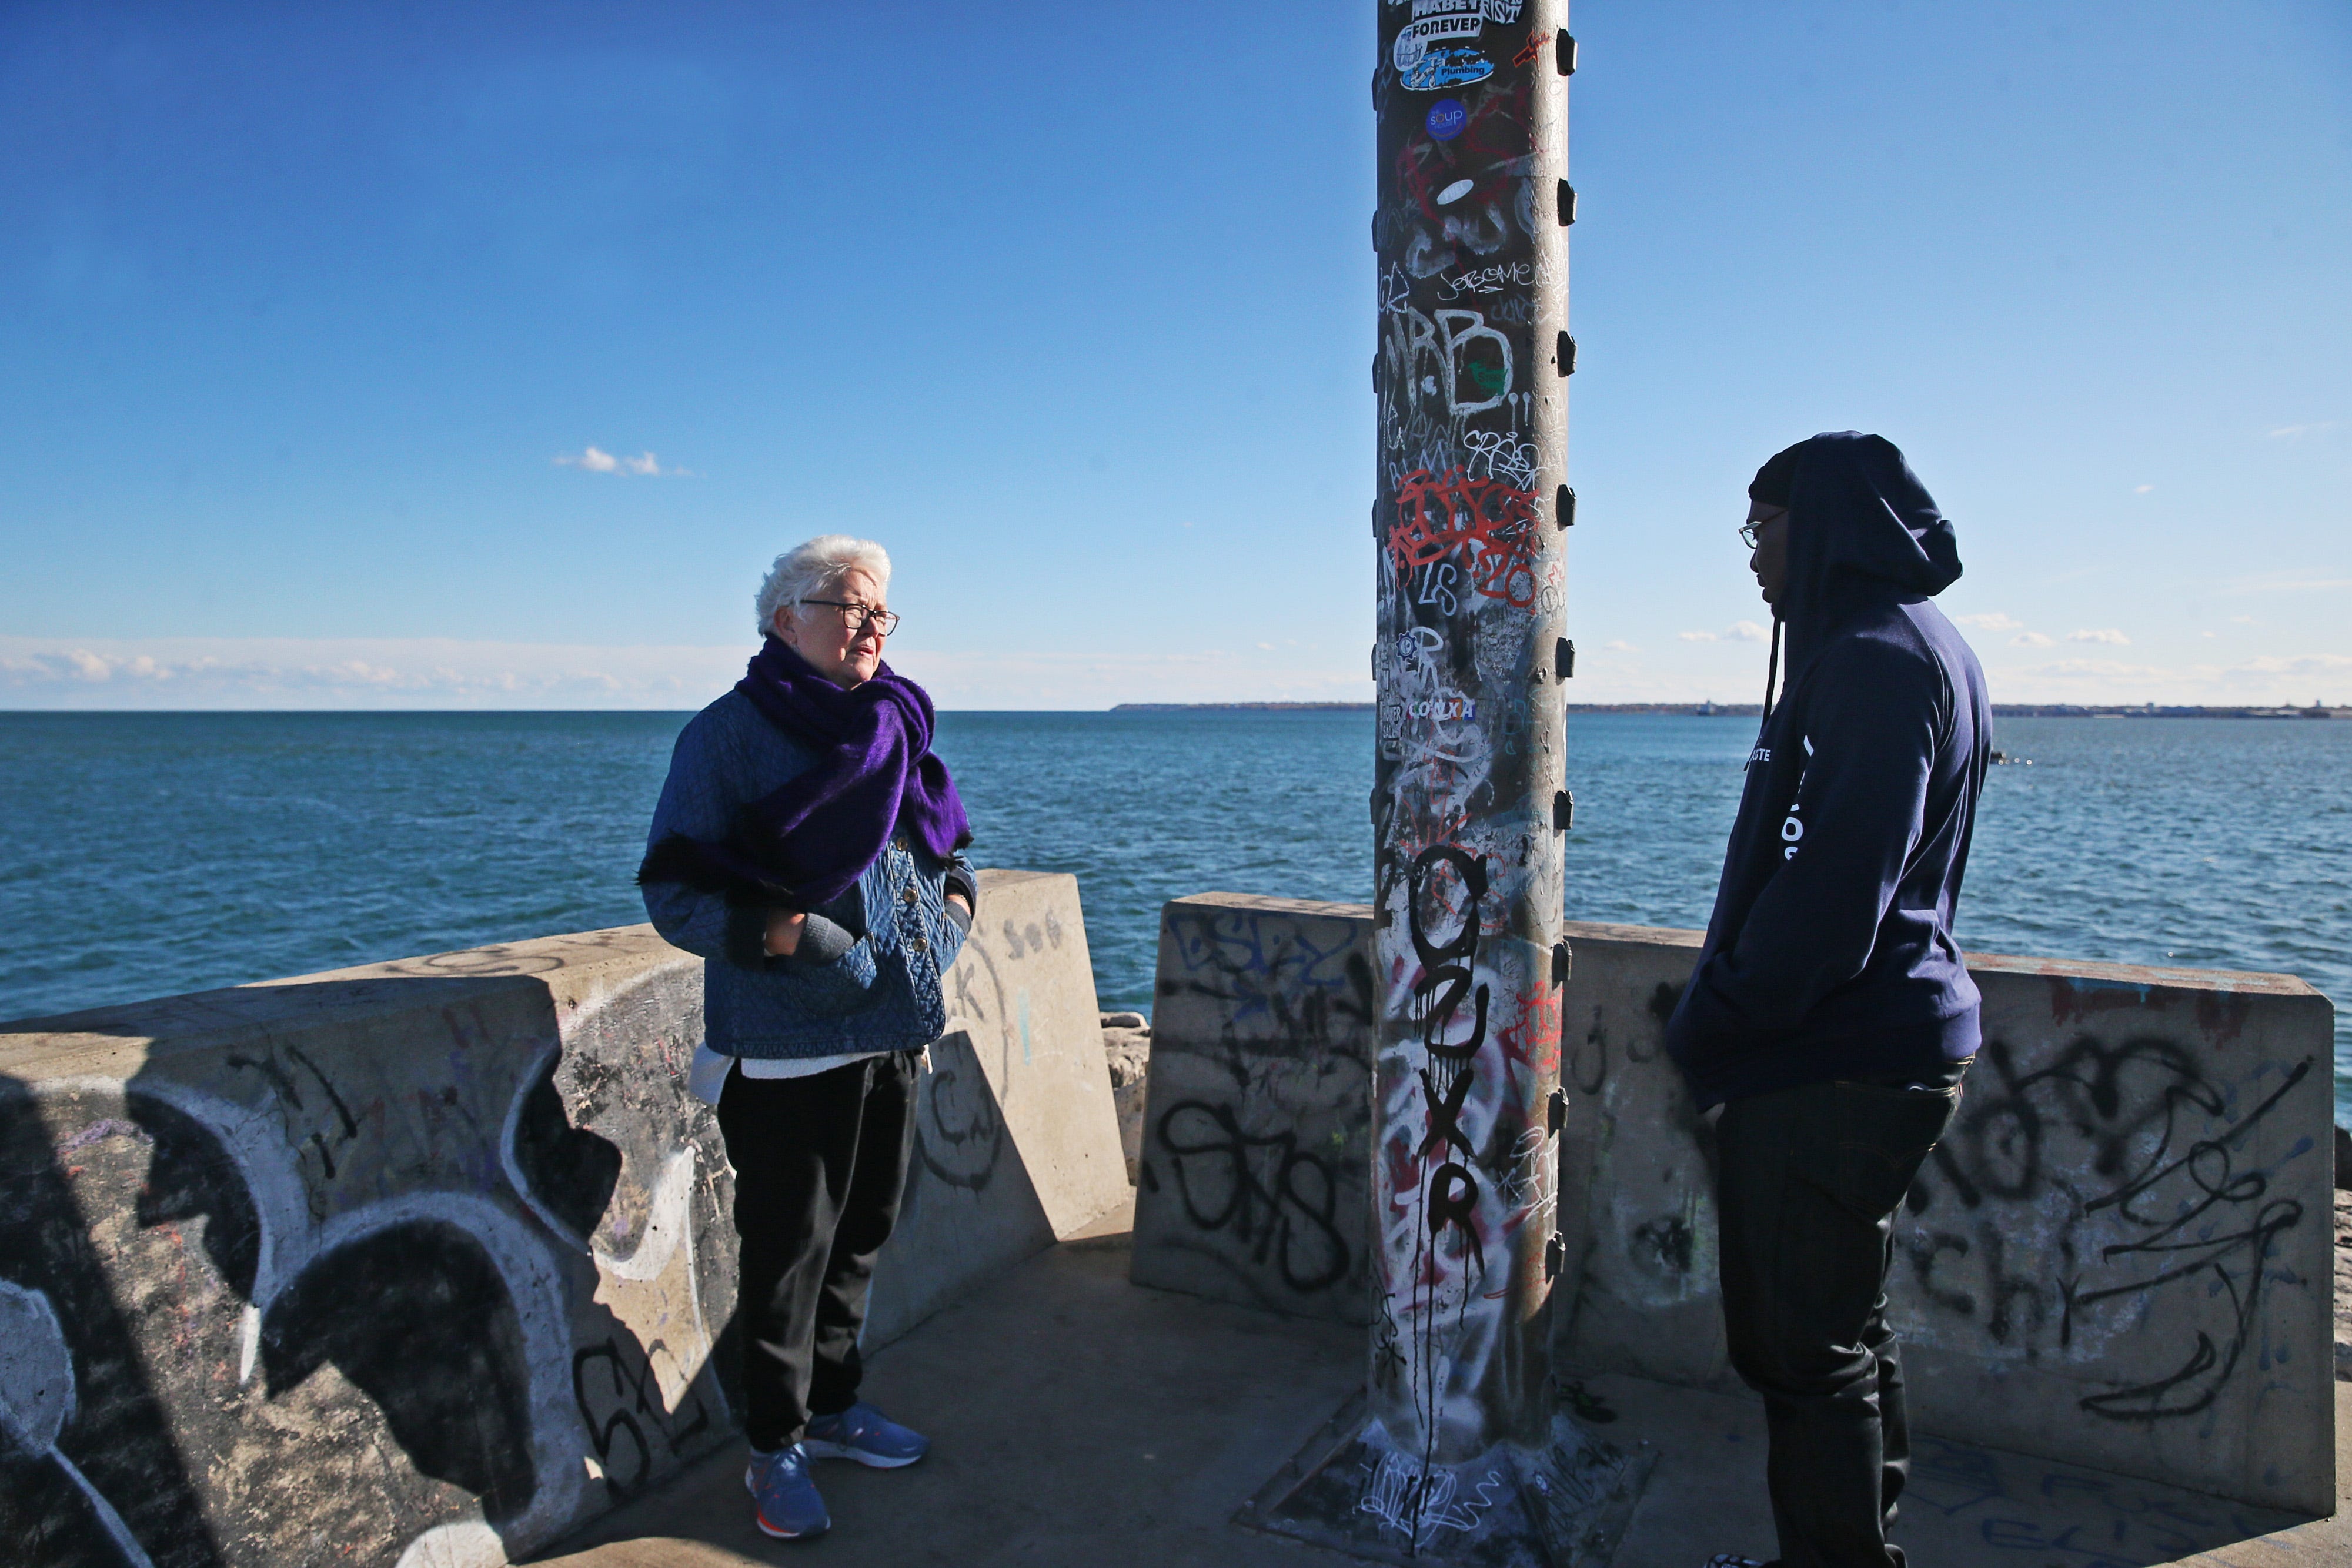 Vicki Conte, left, visits with Marlin Dixon on the Milwaukee lakefront shortly after his release from prison. Conte befriended Marlin while he was incarcerated and continued encouraging him as he transitioned back into society.